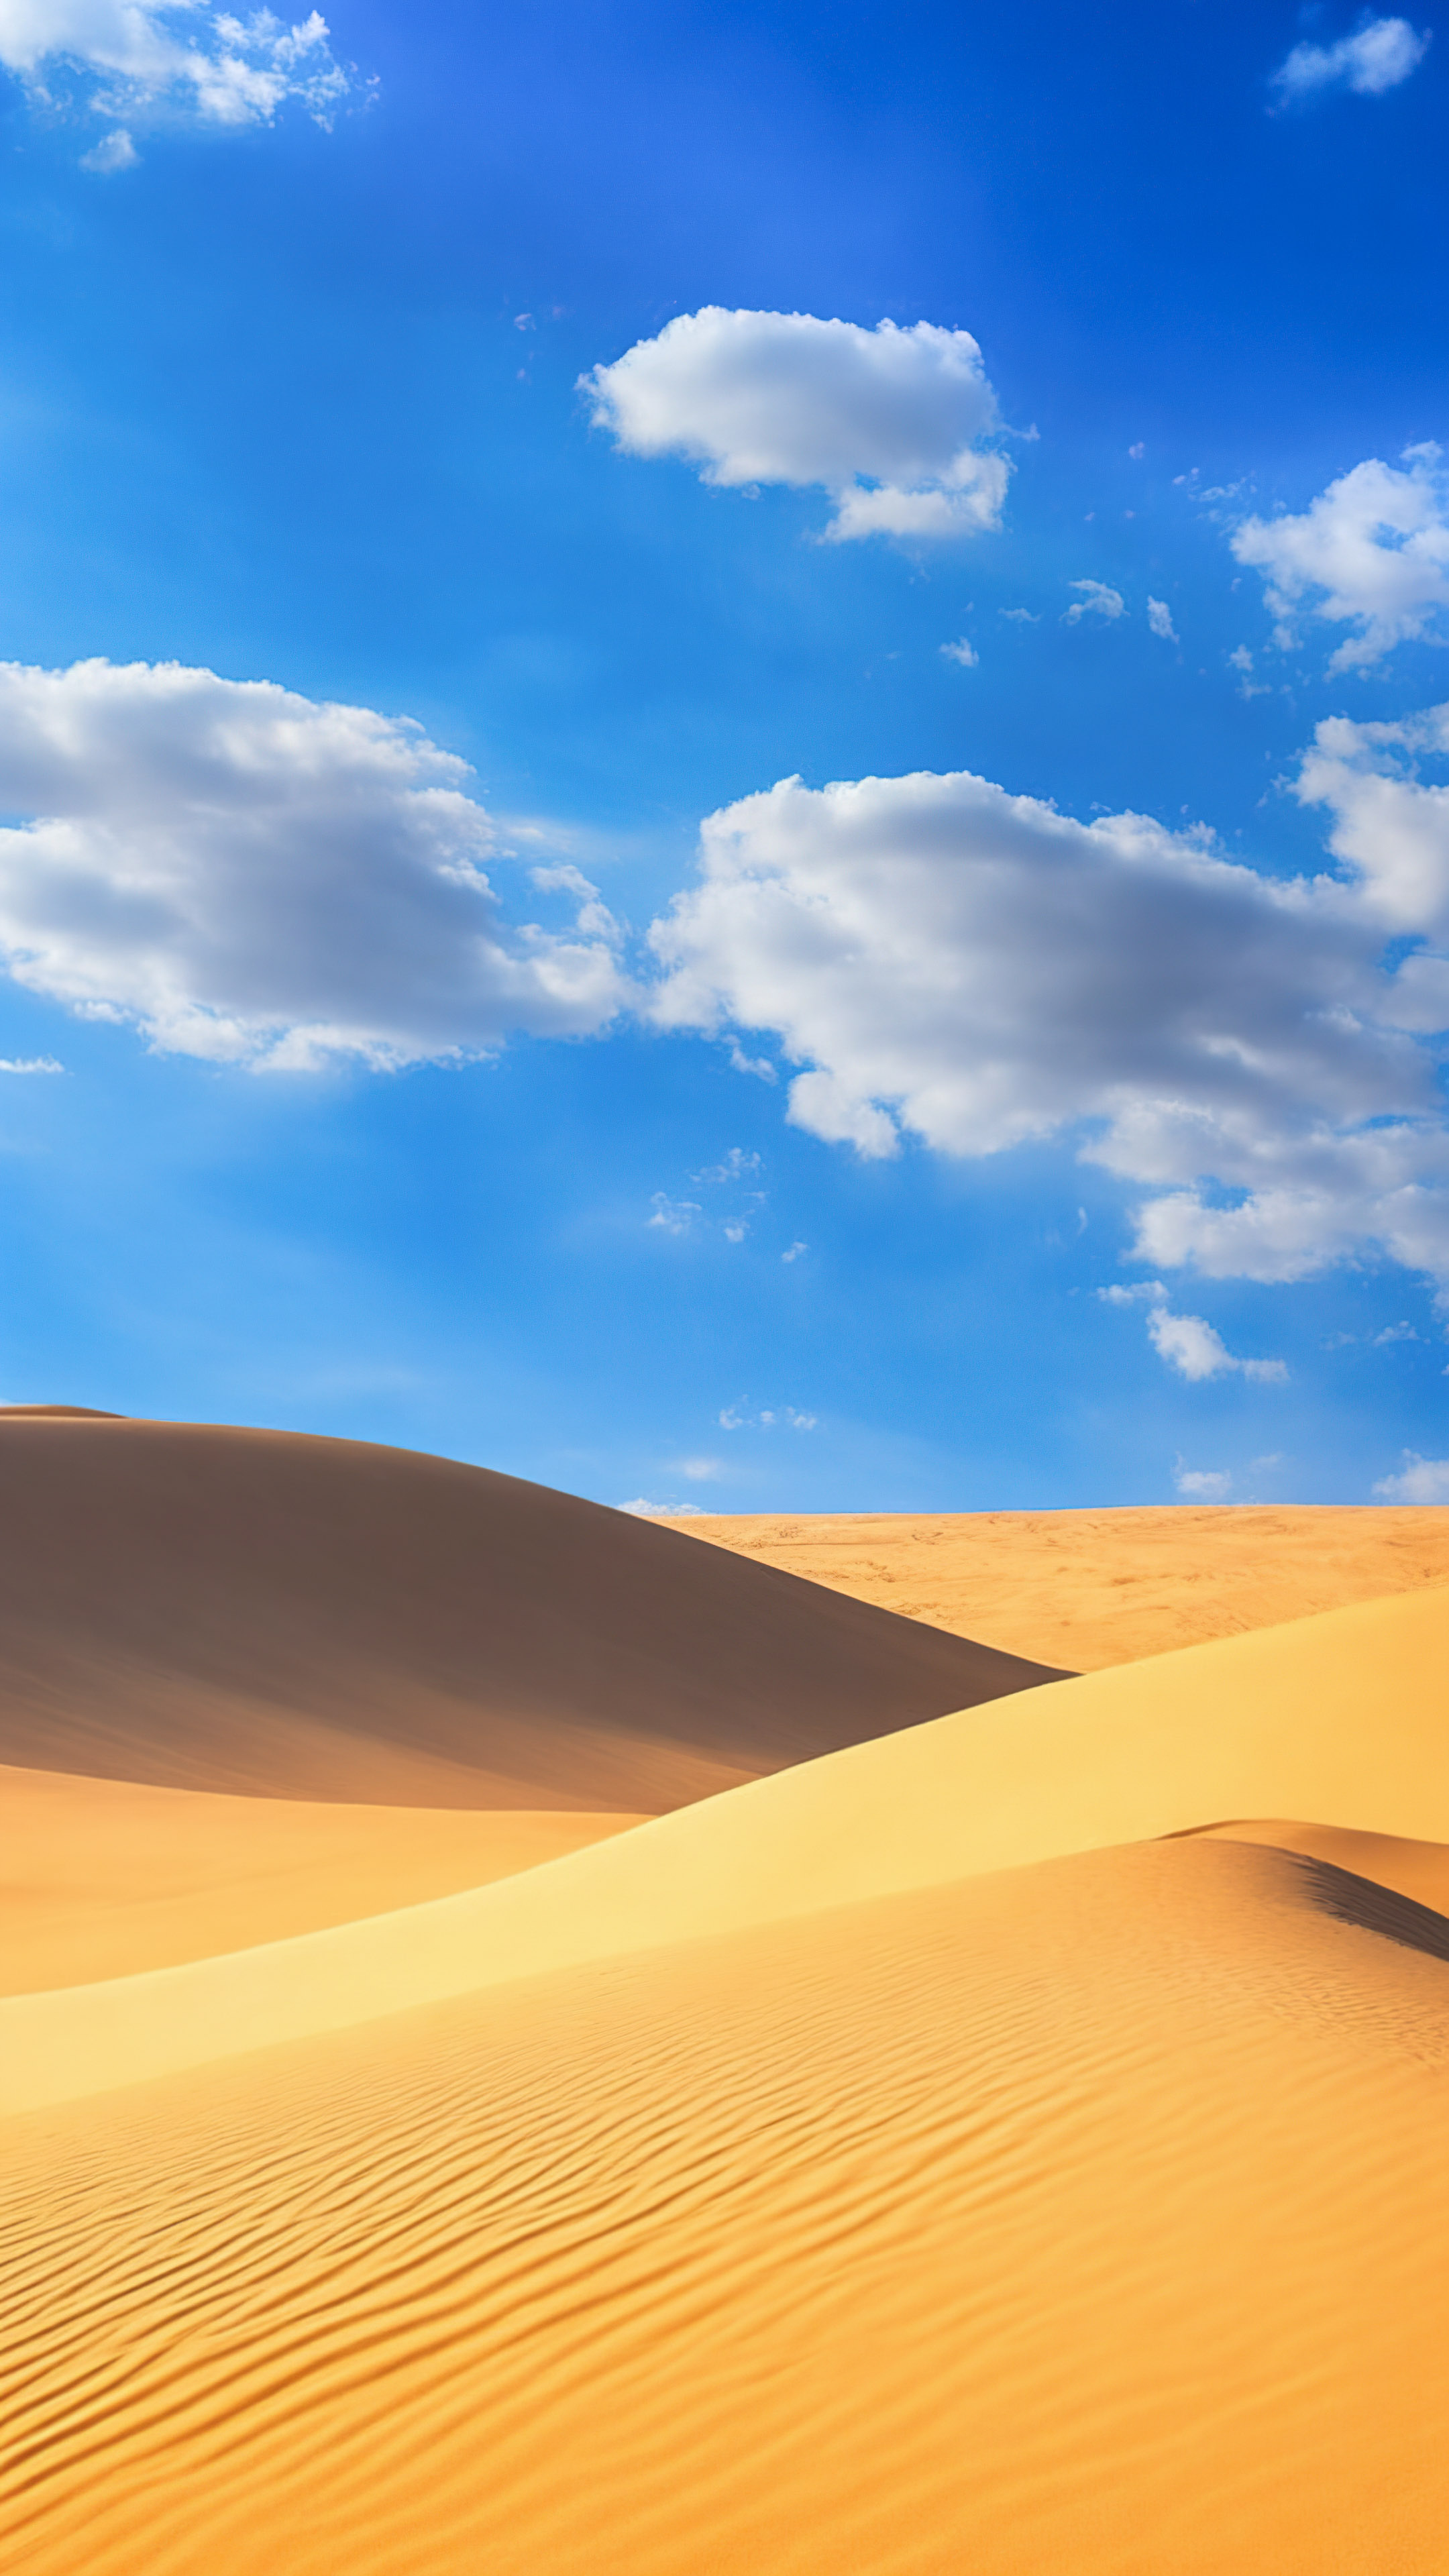 Revel in the calmness of our sky wallpaper, presenting a serene desert landscape with sand dunes stretching to the horizon under a vast, blue sky.